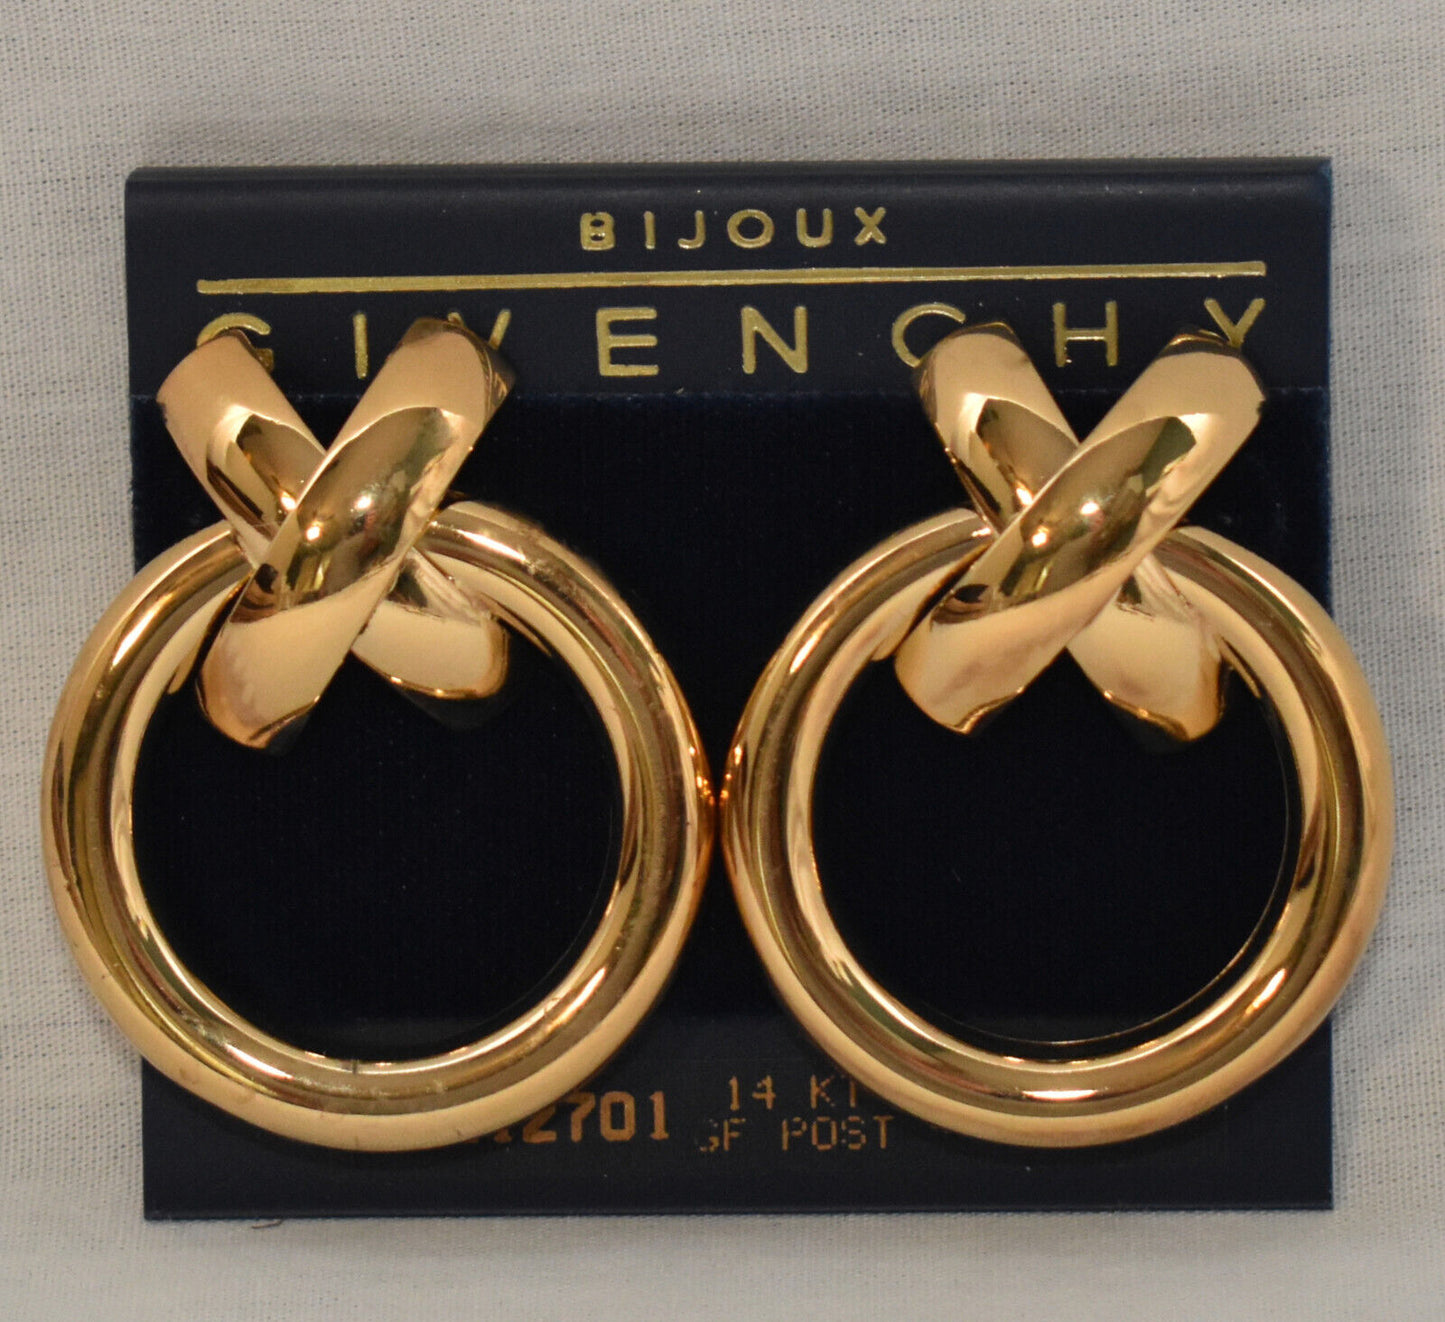 Vintage Givenchy Bijoux Paris Large Gold Criss Cross Earrings Pierced 1.75" New Old Stock